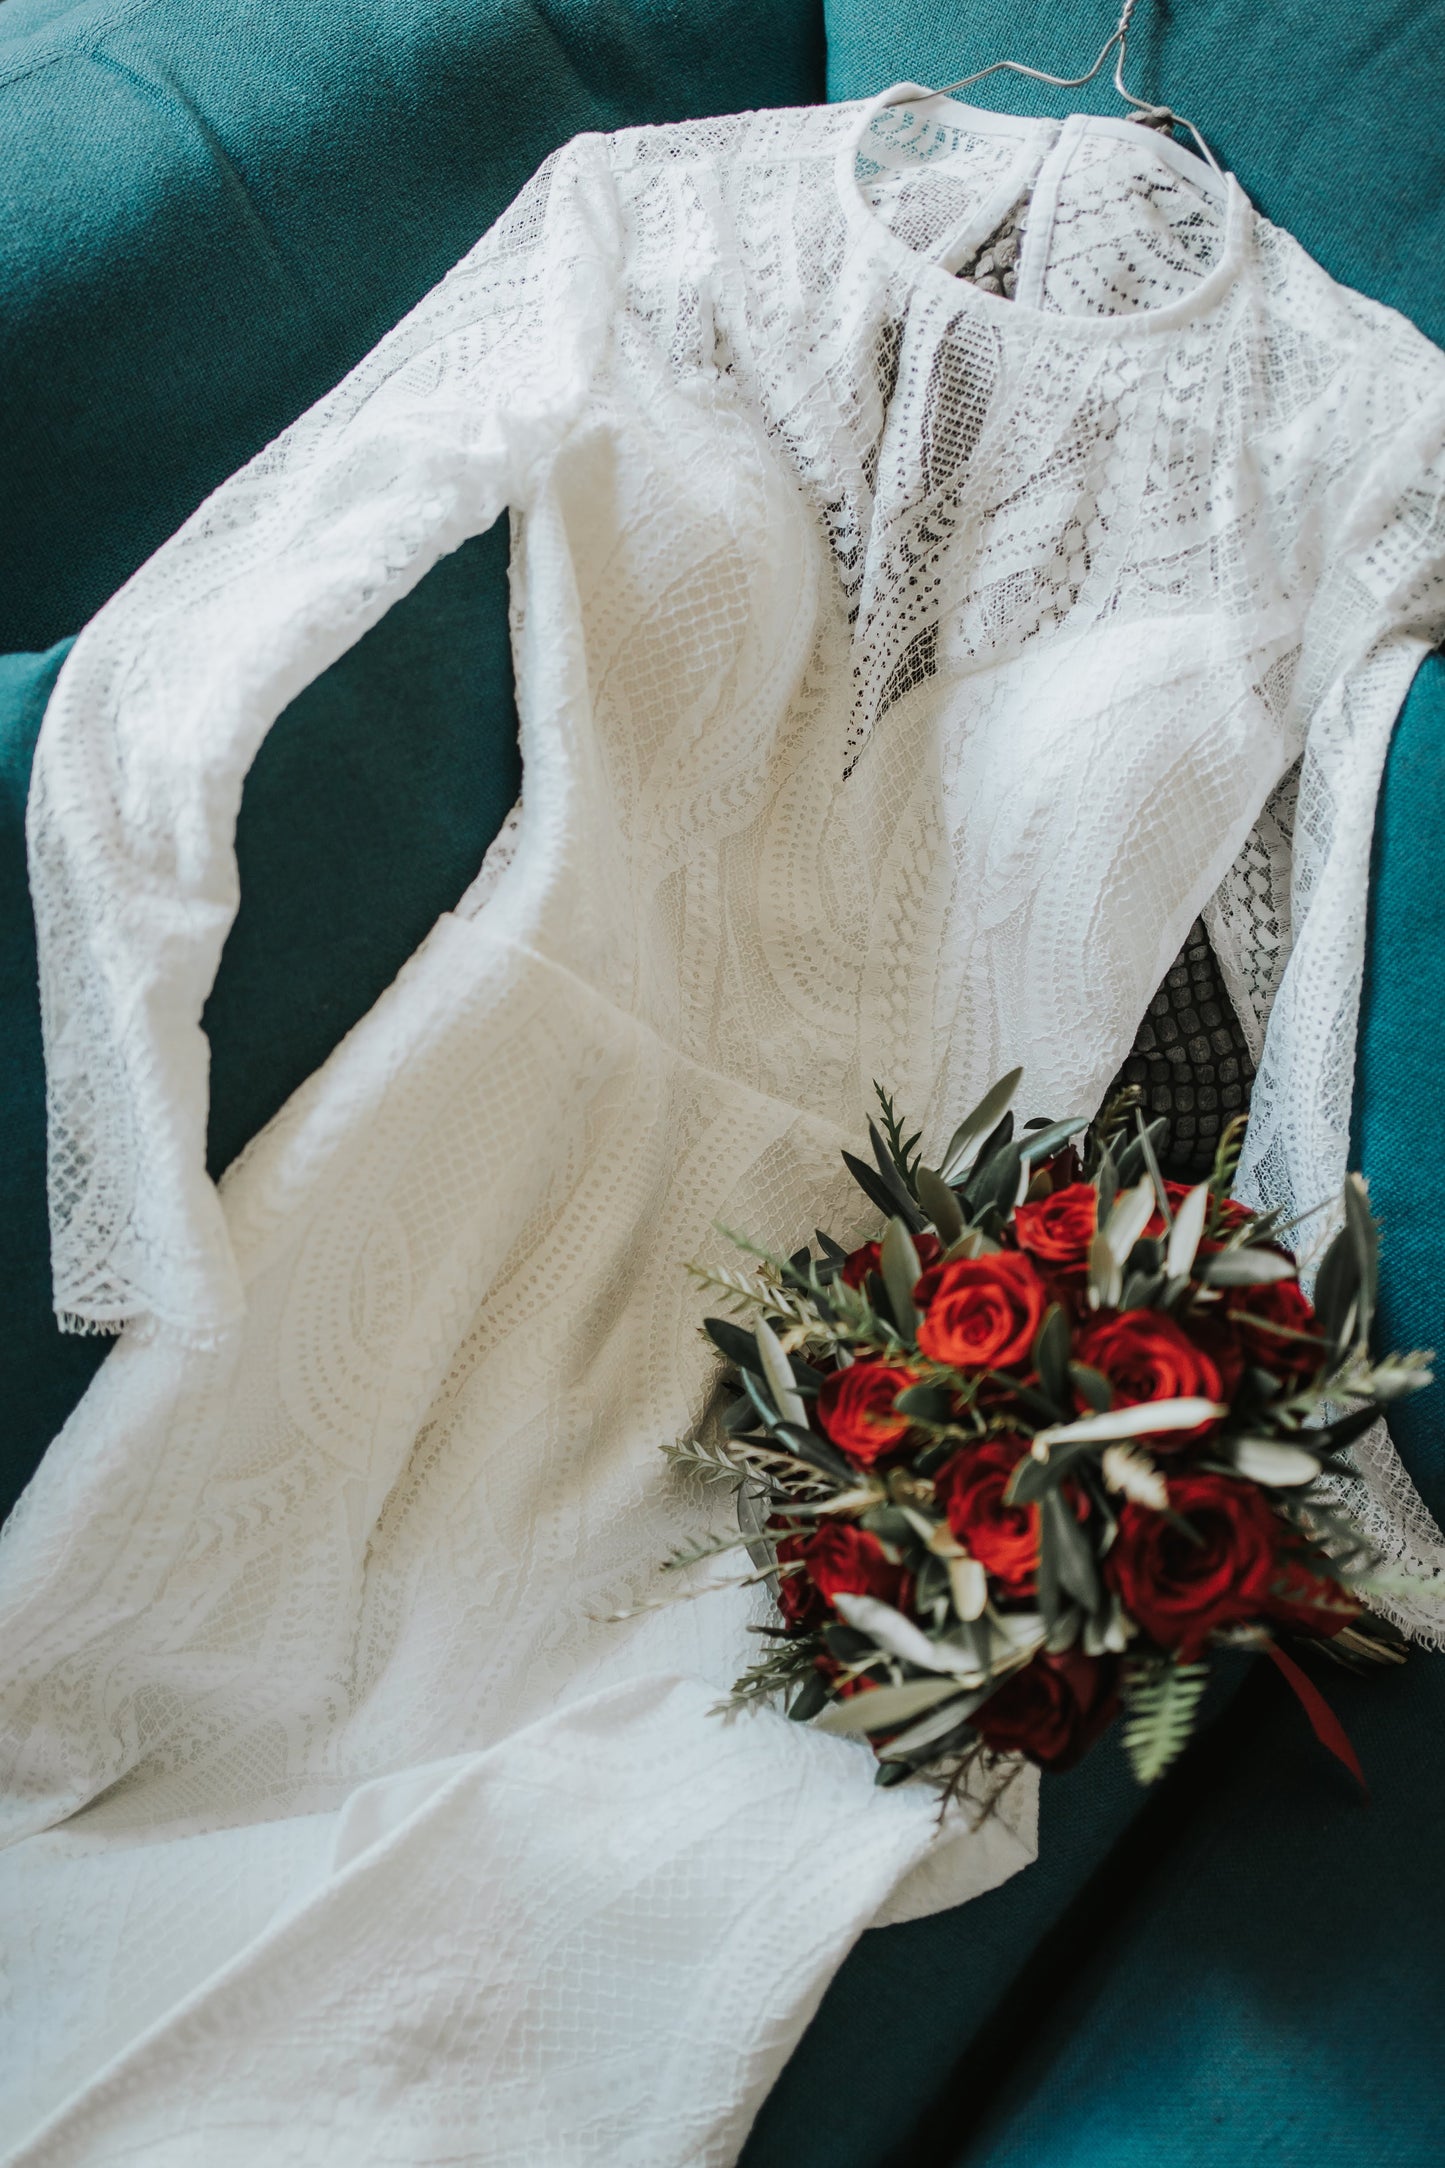 lace wedding dress on a sofa with rose bouquet